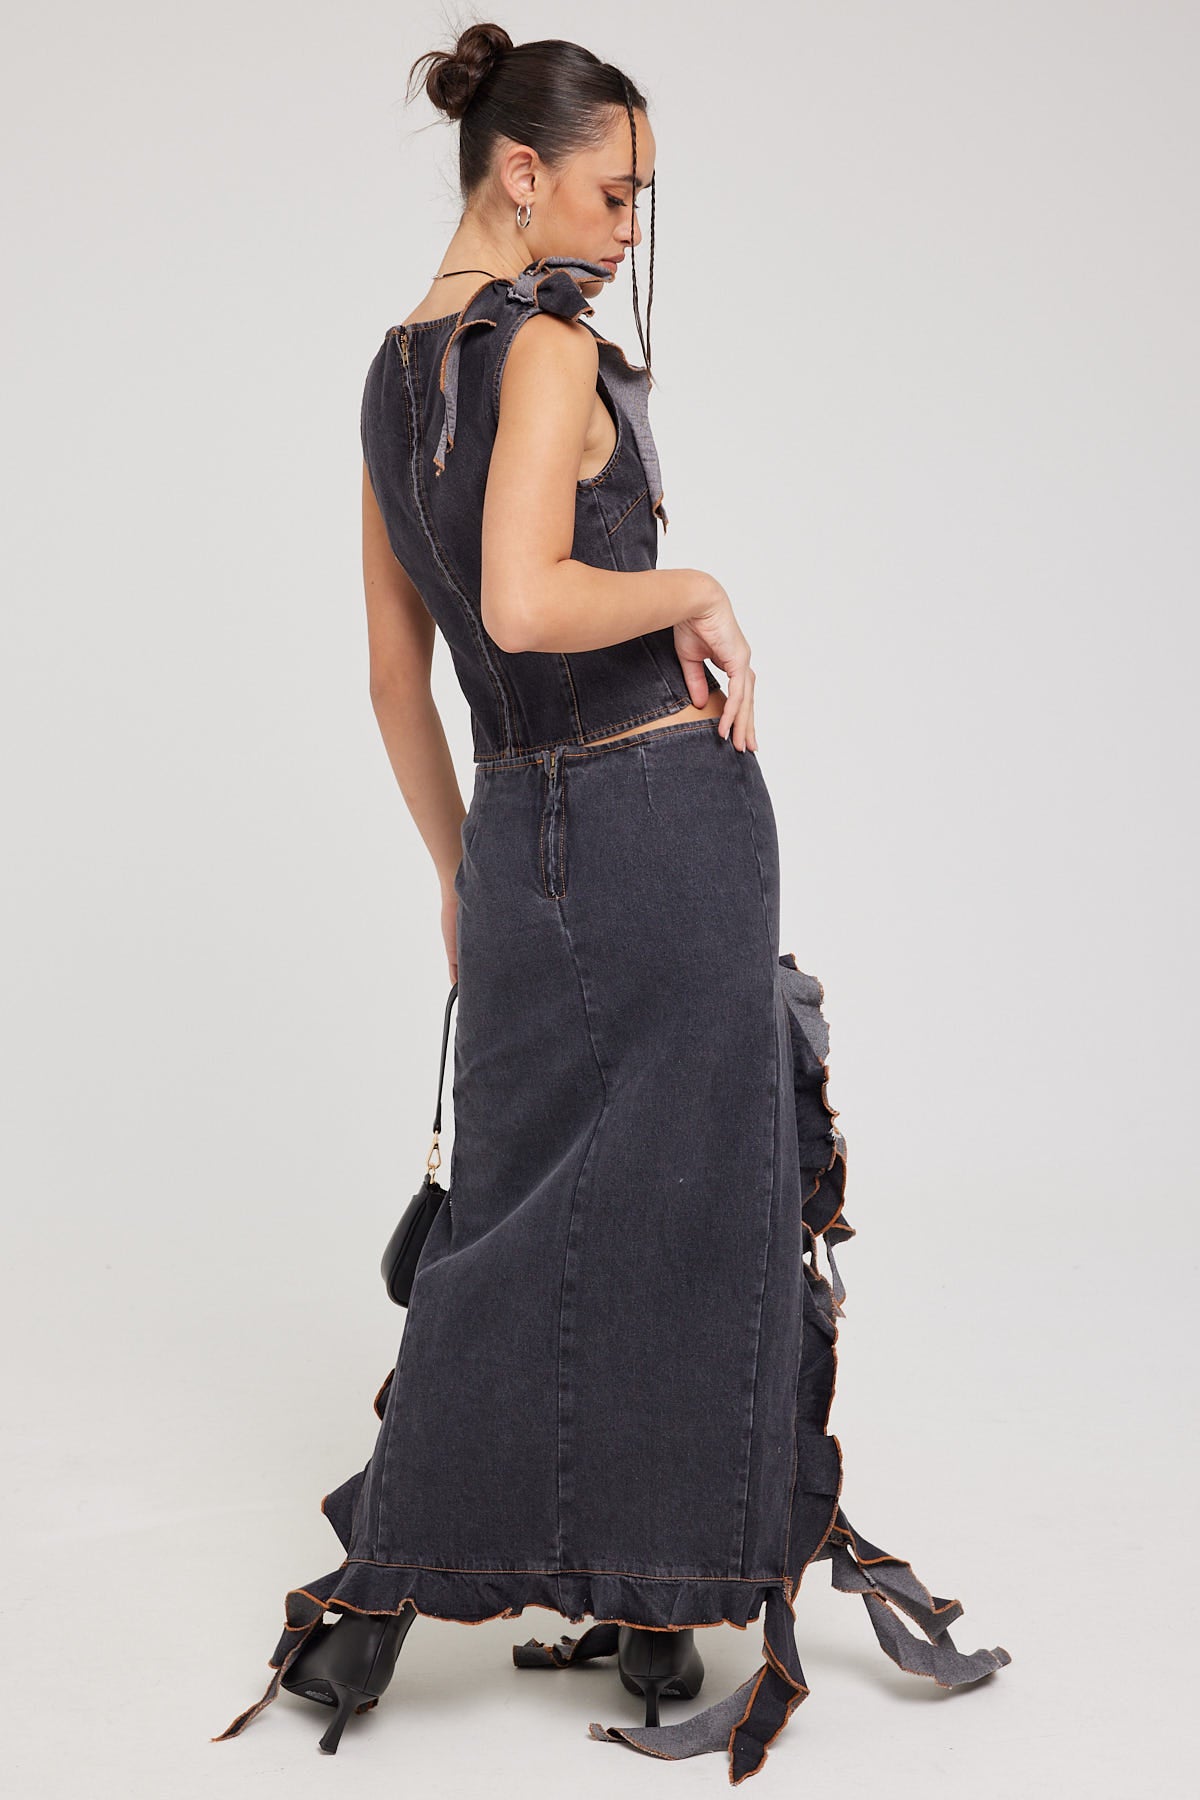 Lioness Rendezvous Skirt Charcoal Charcoal